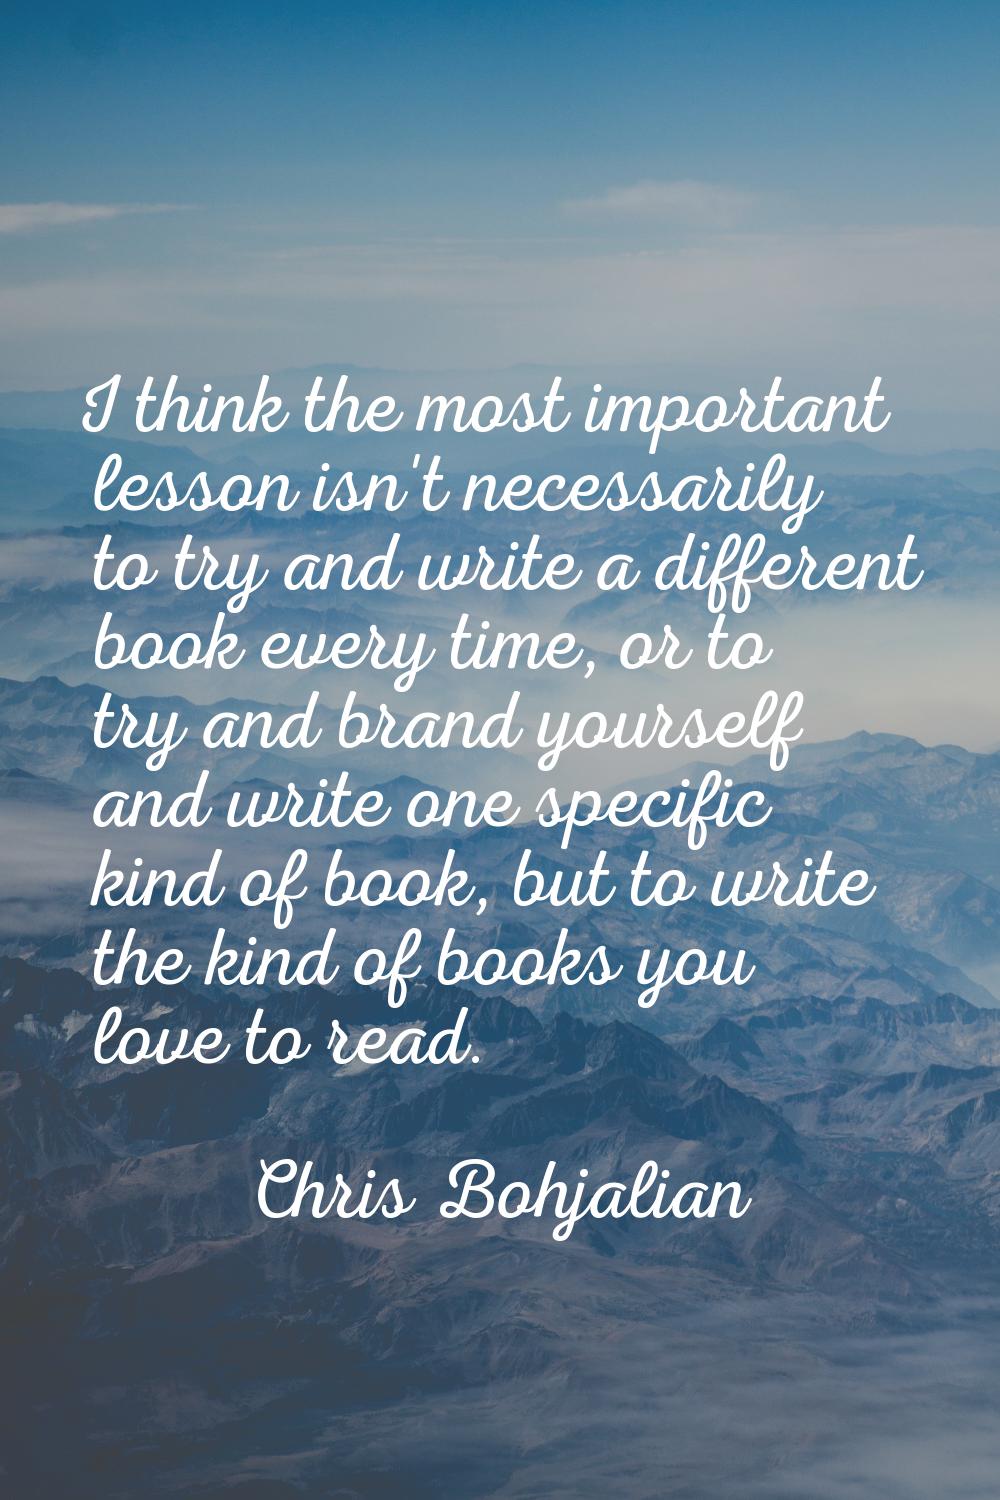 I think the most important lesson isn't necessarily to try and write a different book every time, o